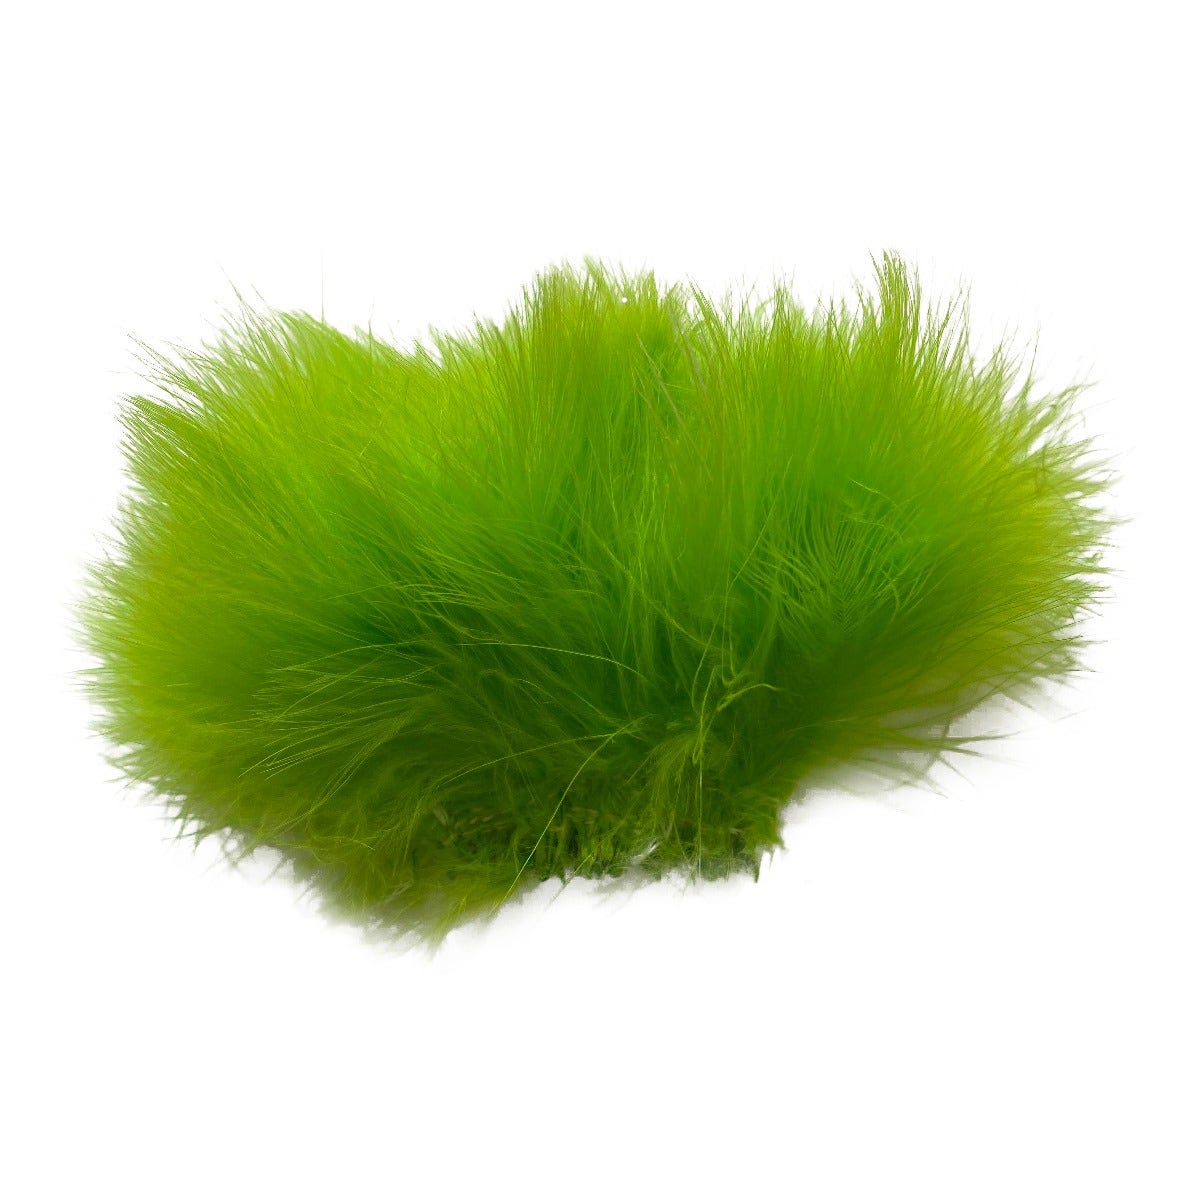 Strung Turkey Marabou Blood Quill Feathers 4-5" - LIME